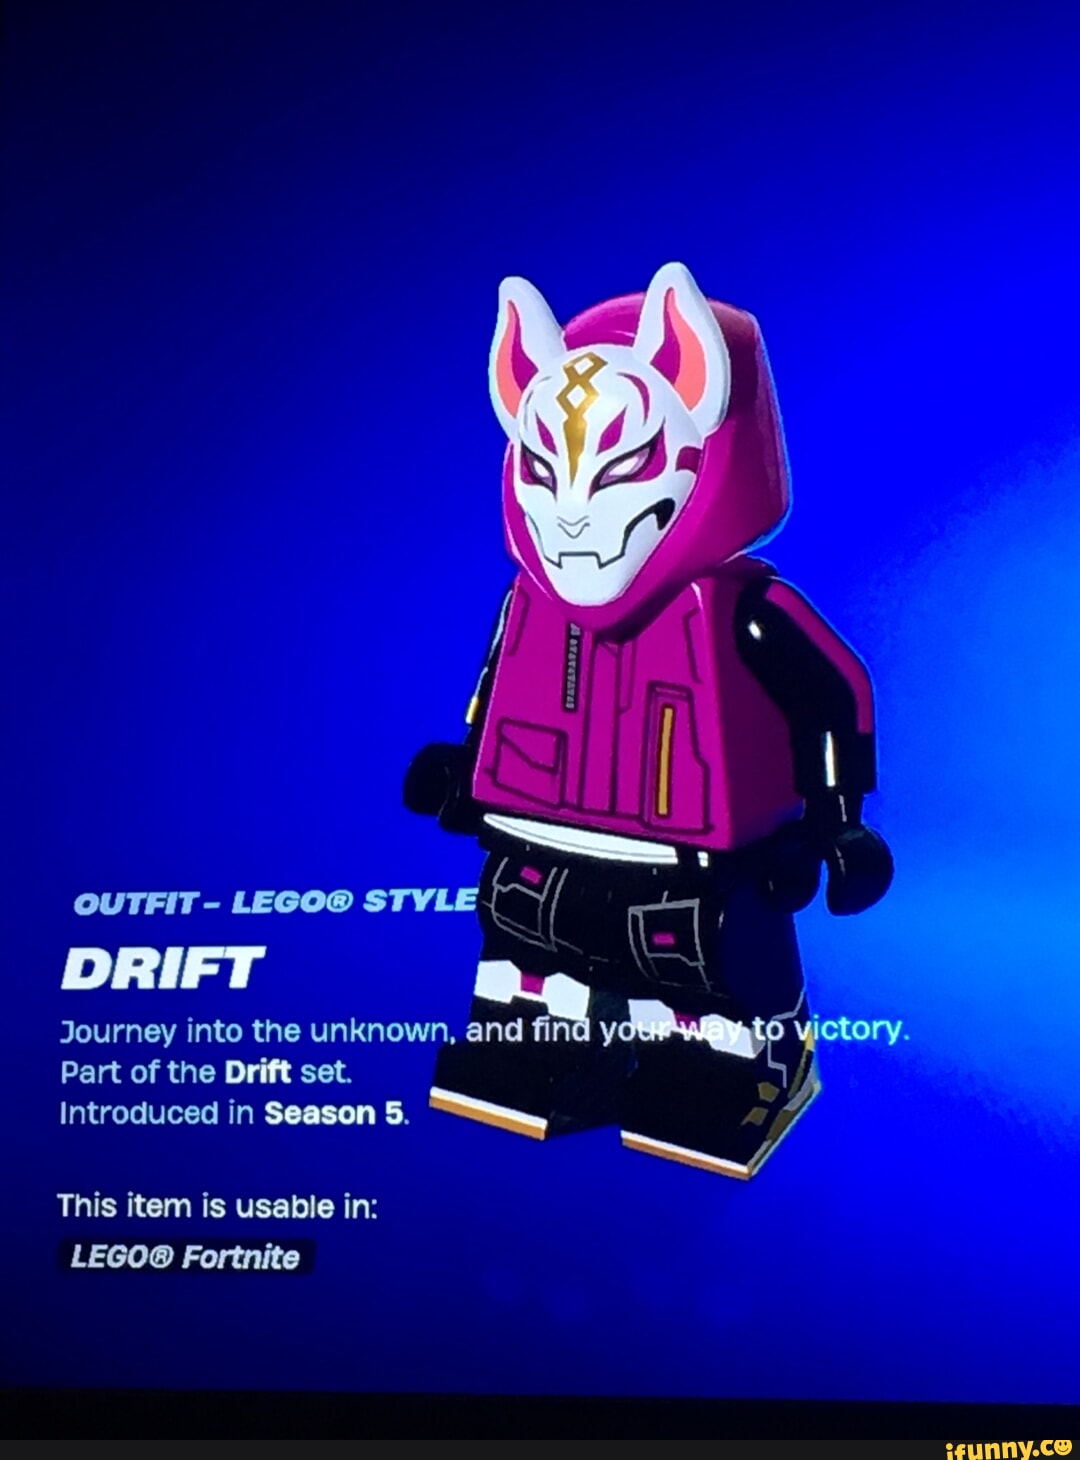 Introducing LEGO Styles in Fortnite!